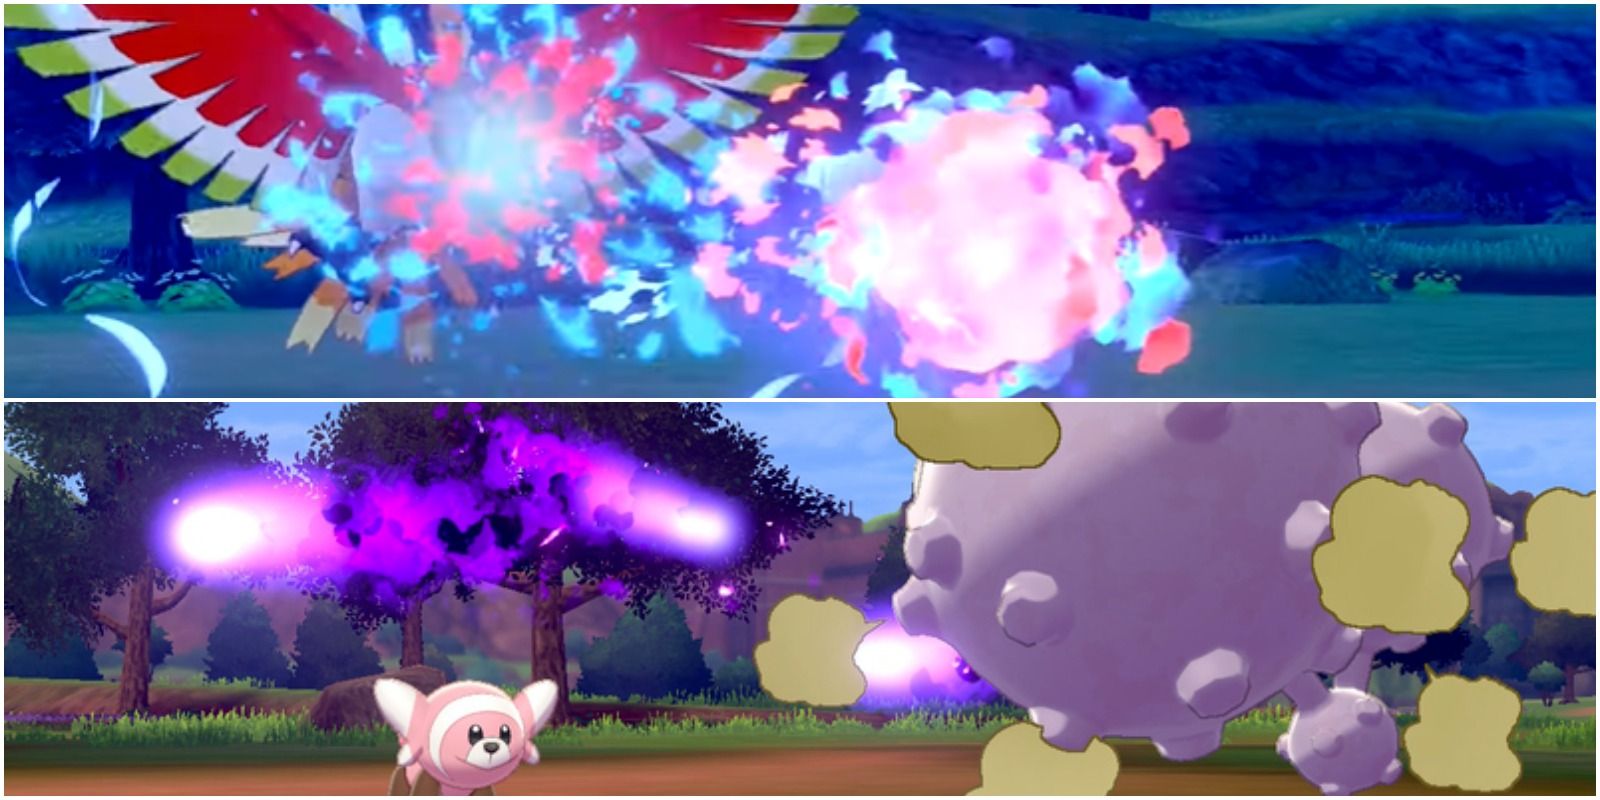 pokemon sword and shield ho-oh using sacred fire and weezing using will-o-wisp